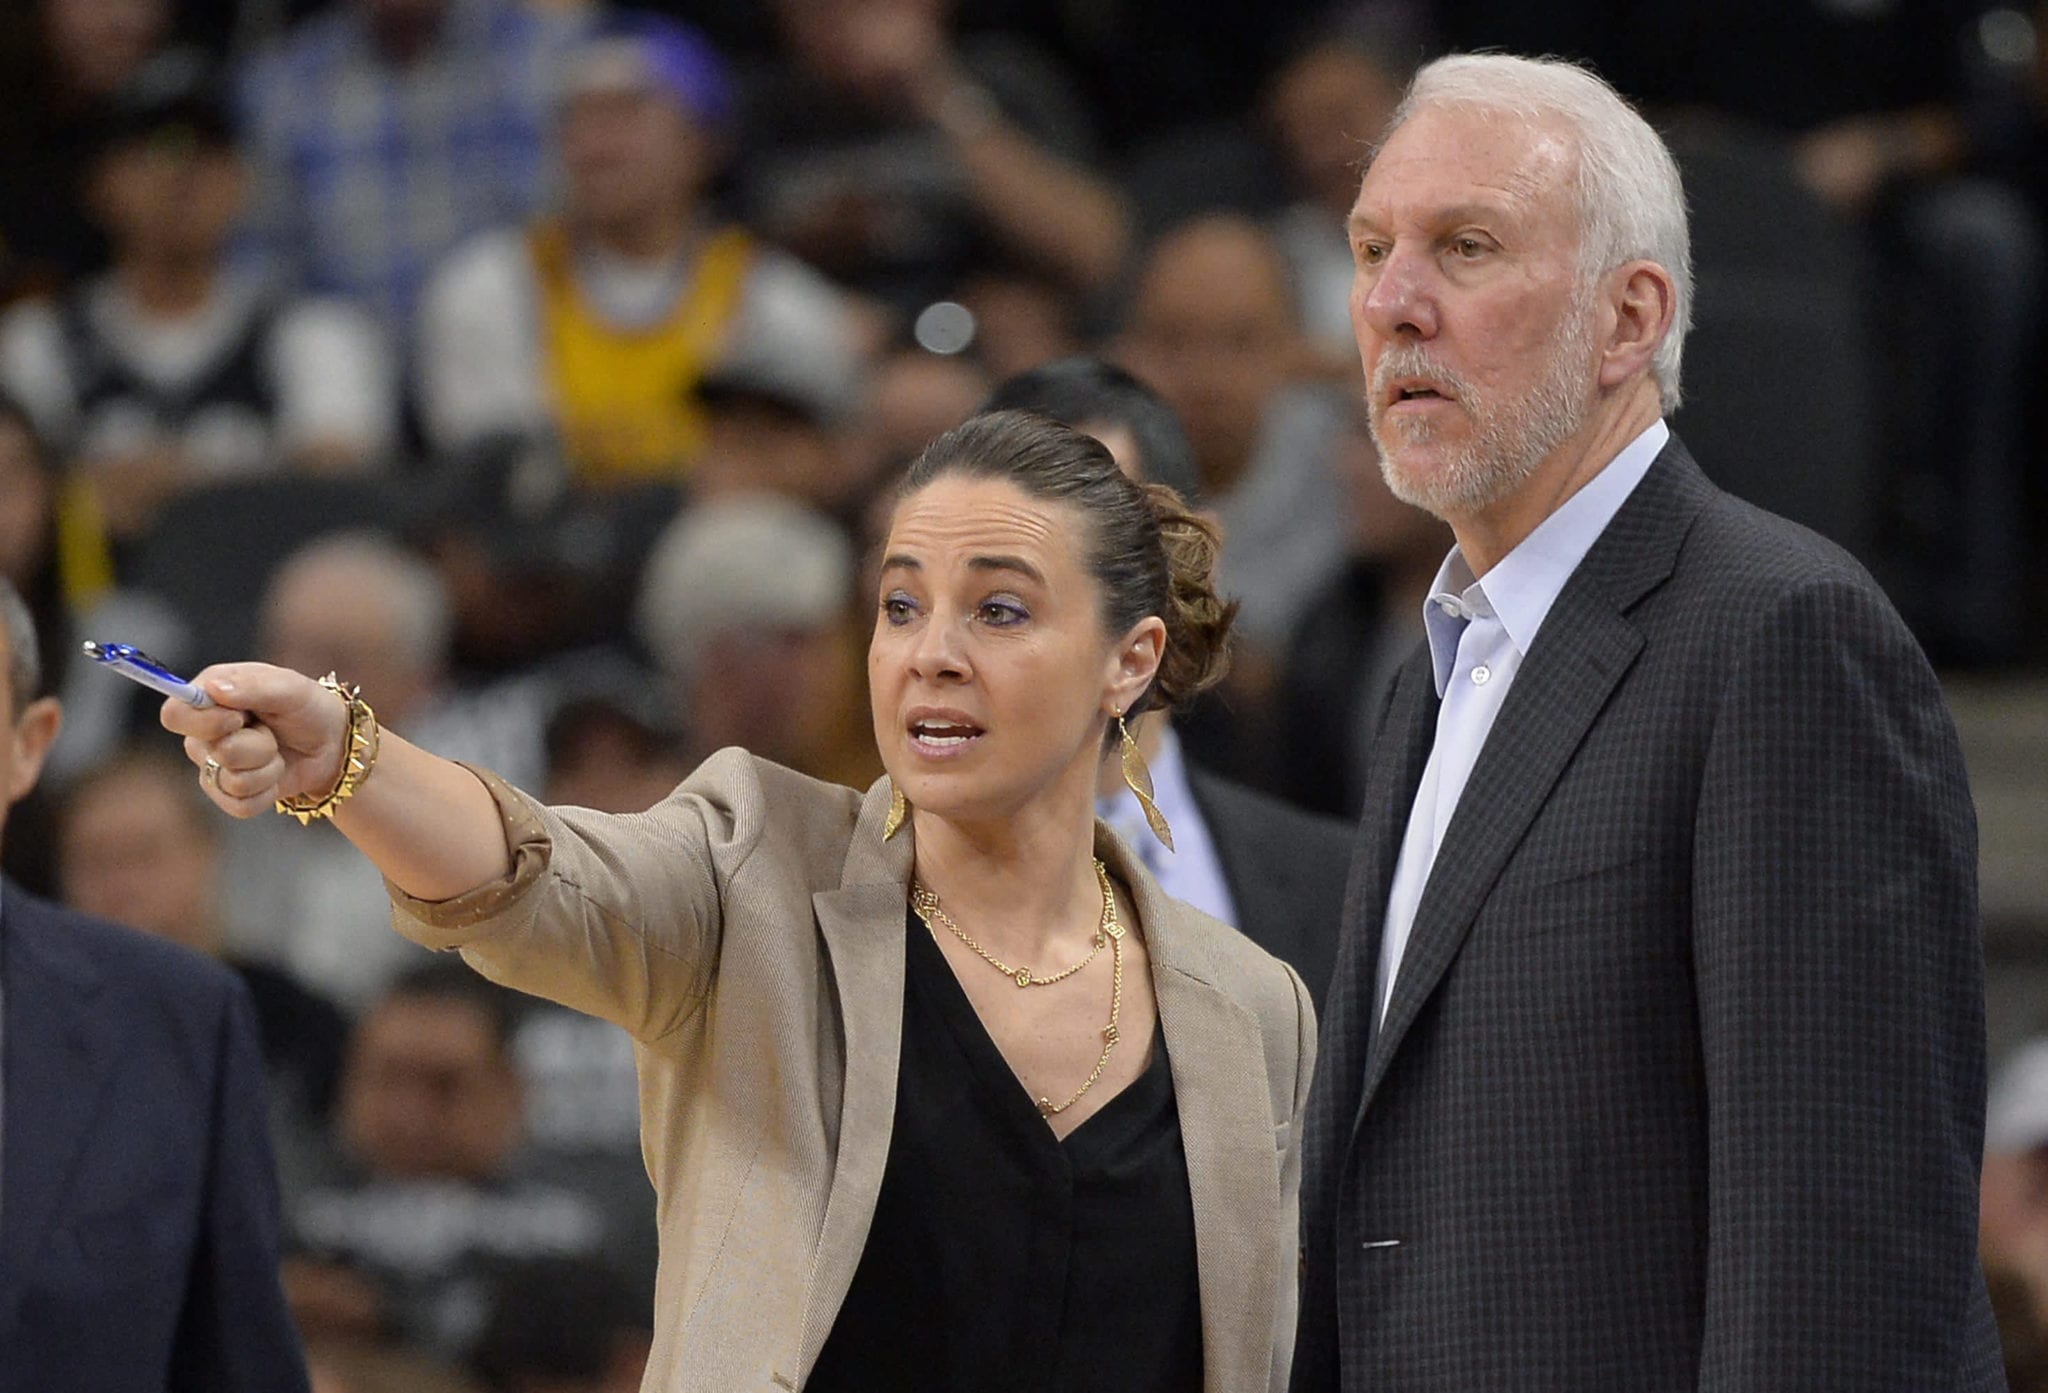 Becky Hammon Talks About Blazers’ Job: ‘If you don’t want to hire me, you’ll find that reason’